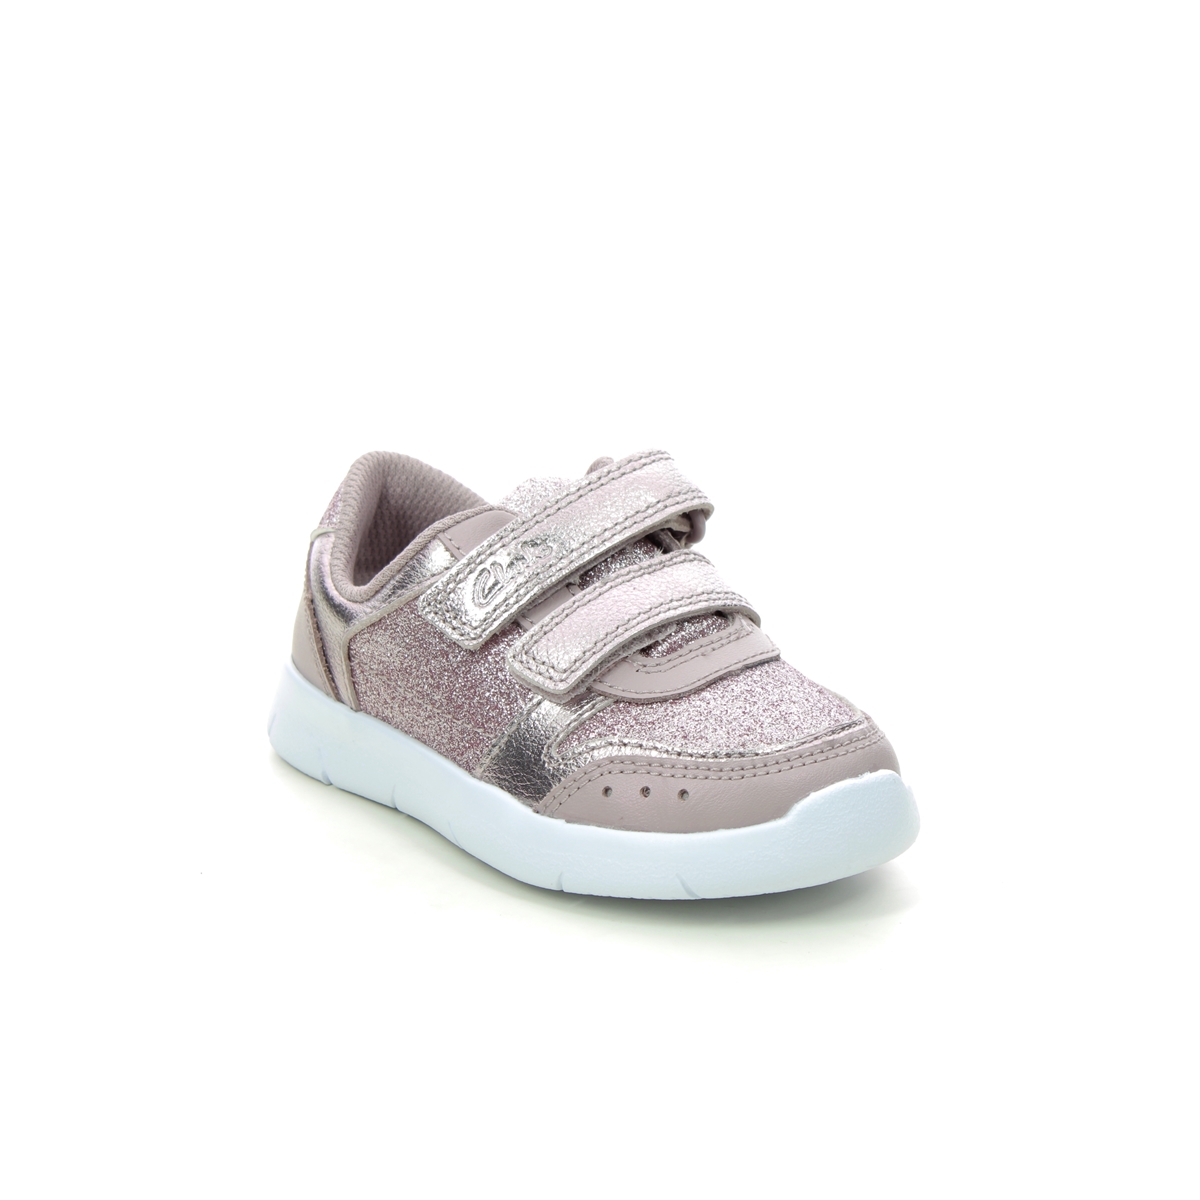 Clarks Ath Sonar T Pink Kids Toddler Girls Trainers 683726F In Size 6 In Plain Pink F Width Fitting Regular Fit For kids